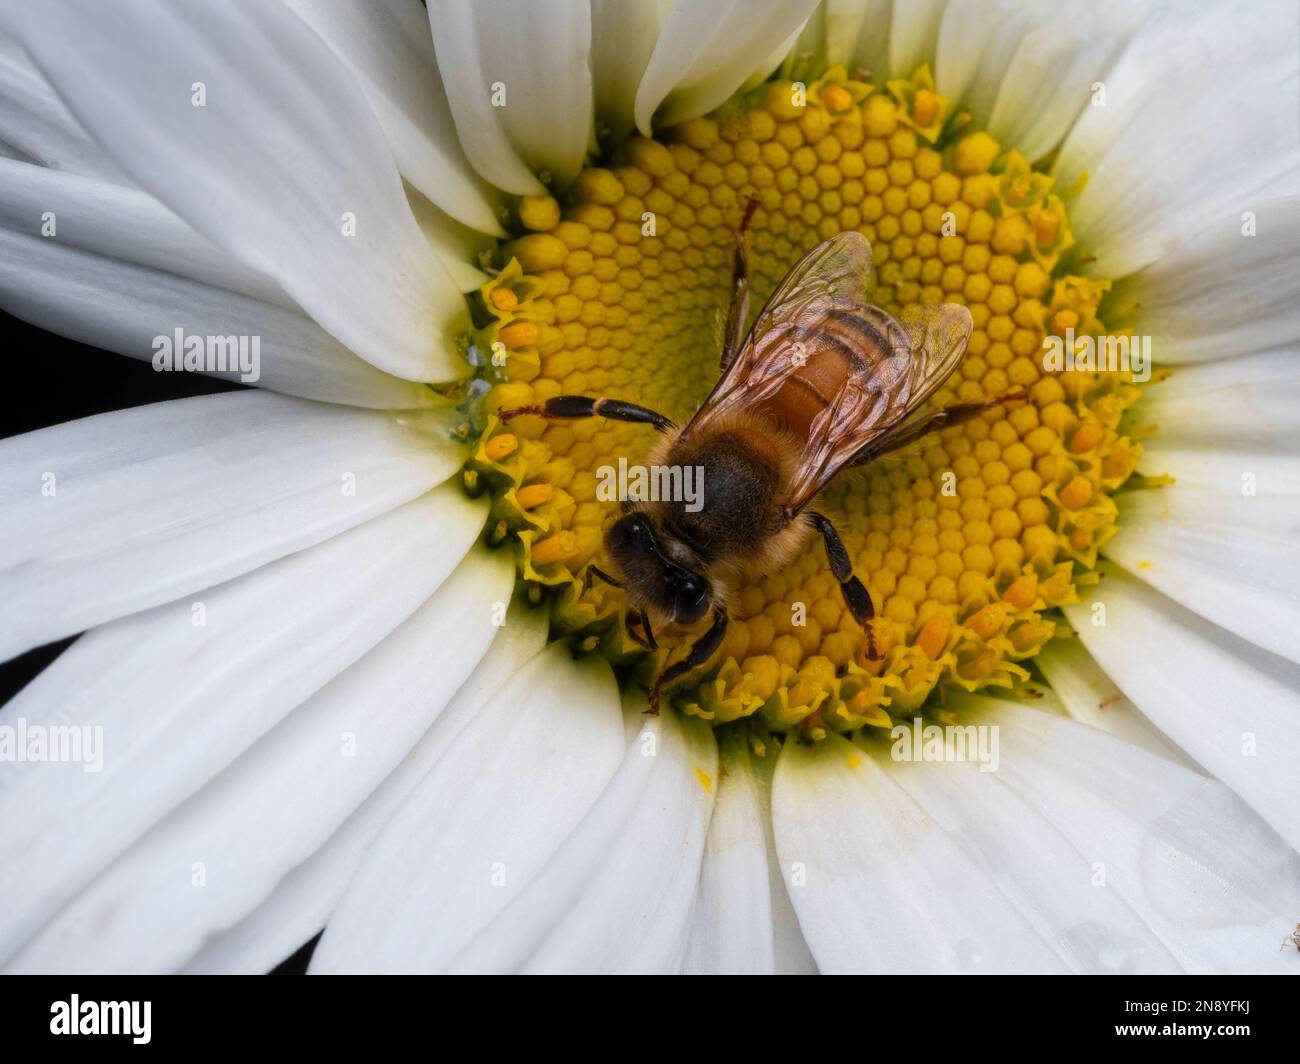 Dorsal view of a domesticated European honey bee (Apis mellifera) on a yellow and white daisy flower Stock Photo